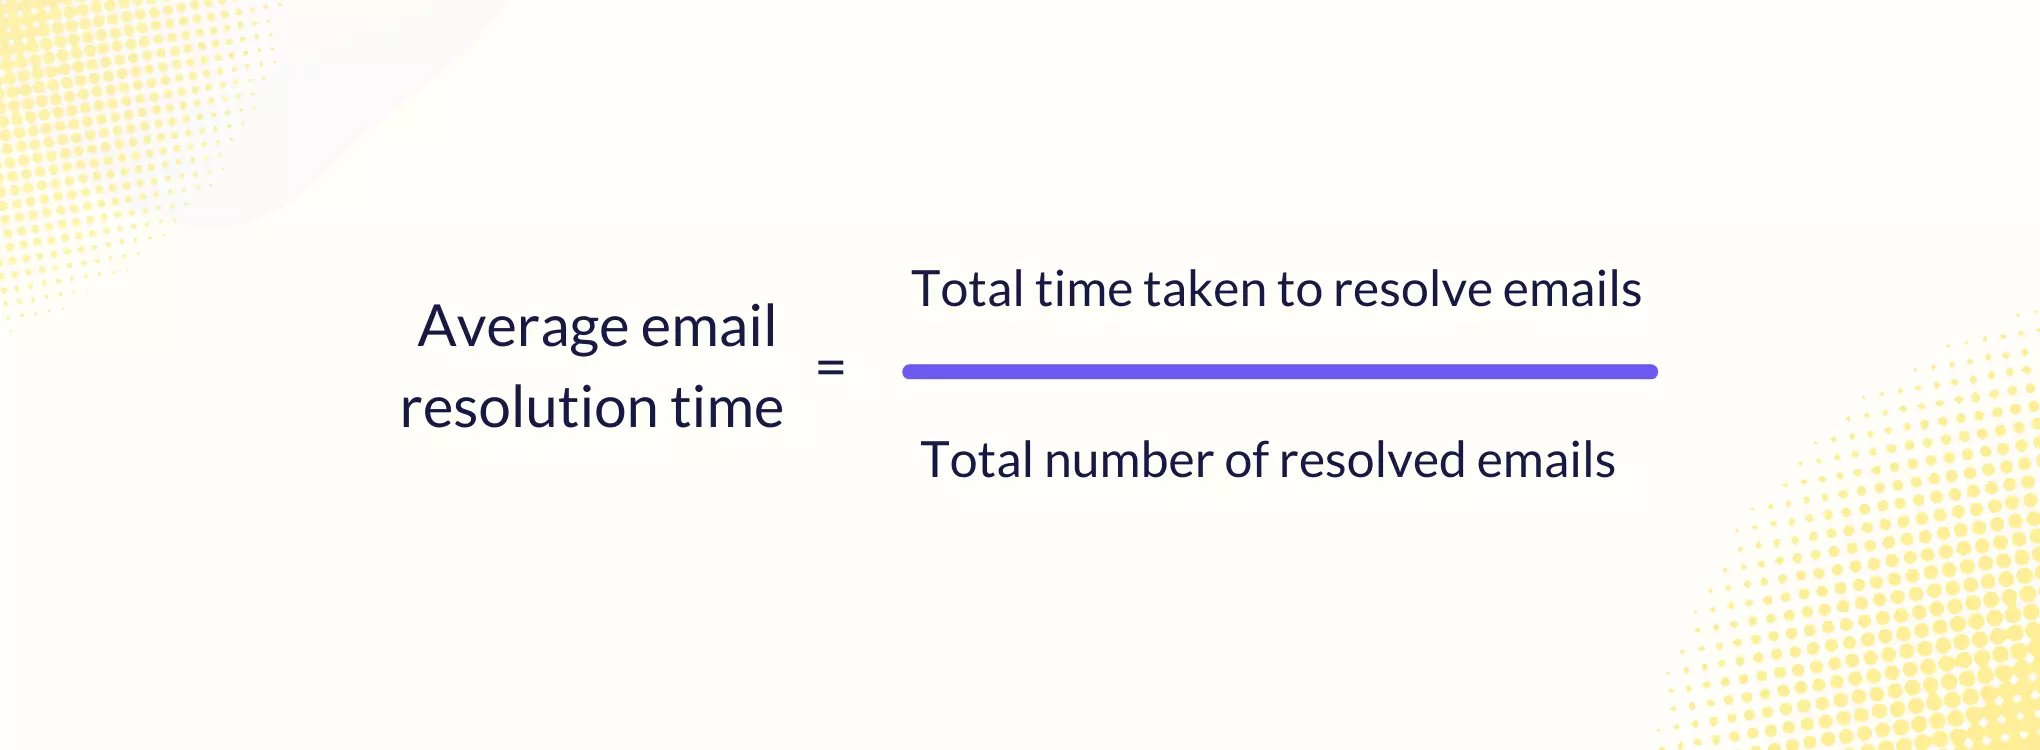 reducing-email-resolution-time